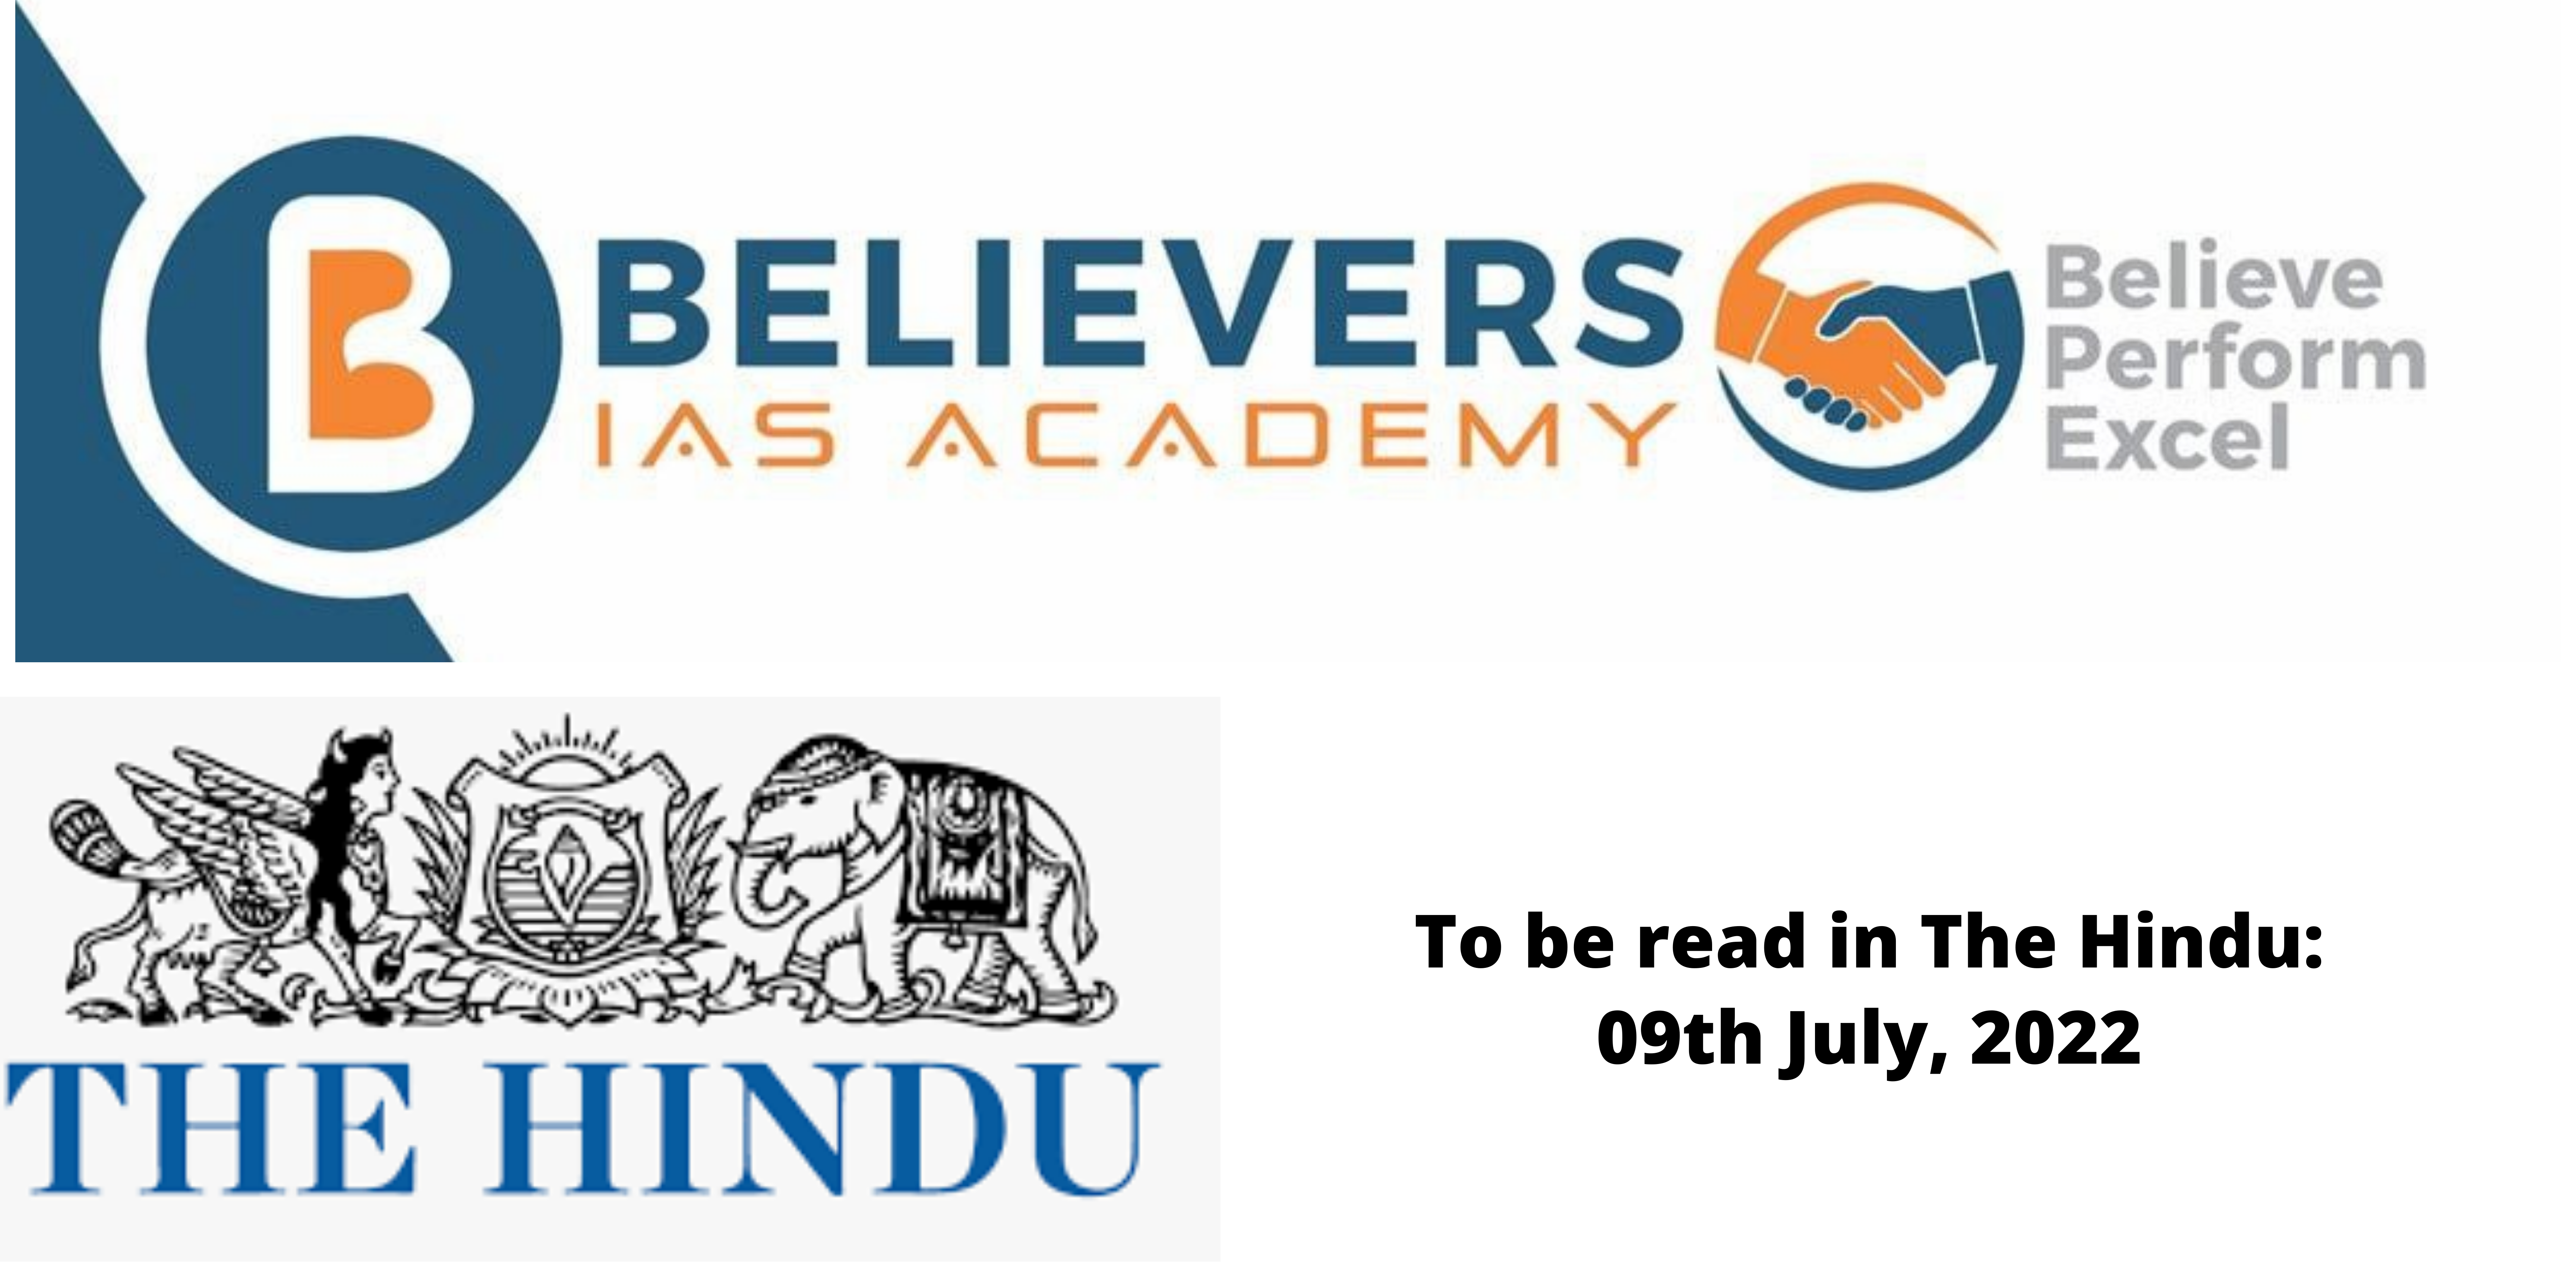 The Hindu - Important News Article for IAS 09th July, 2022